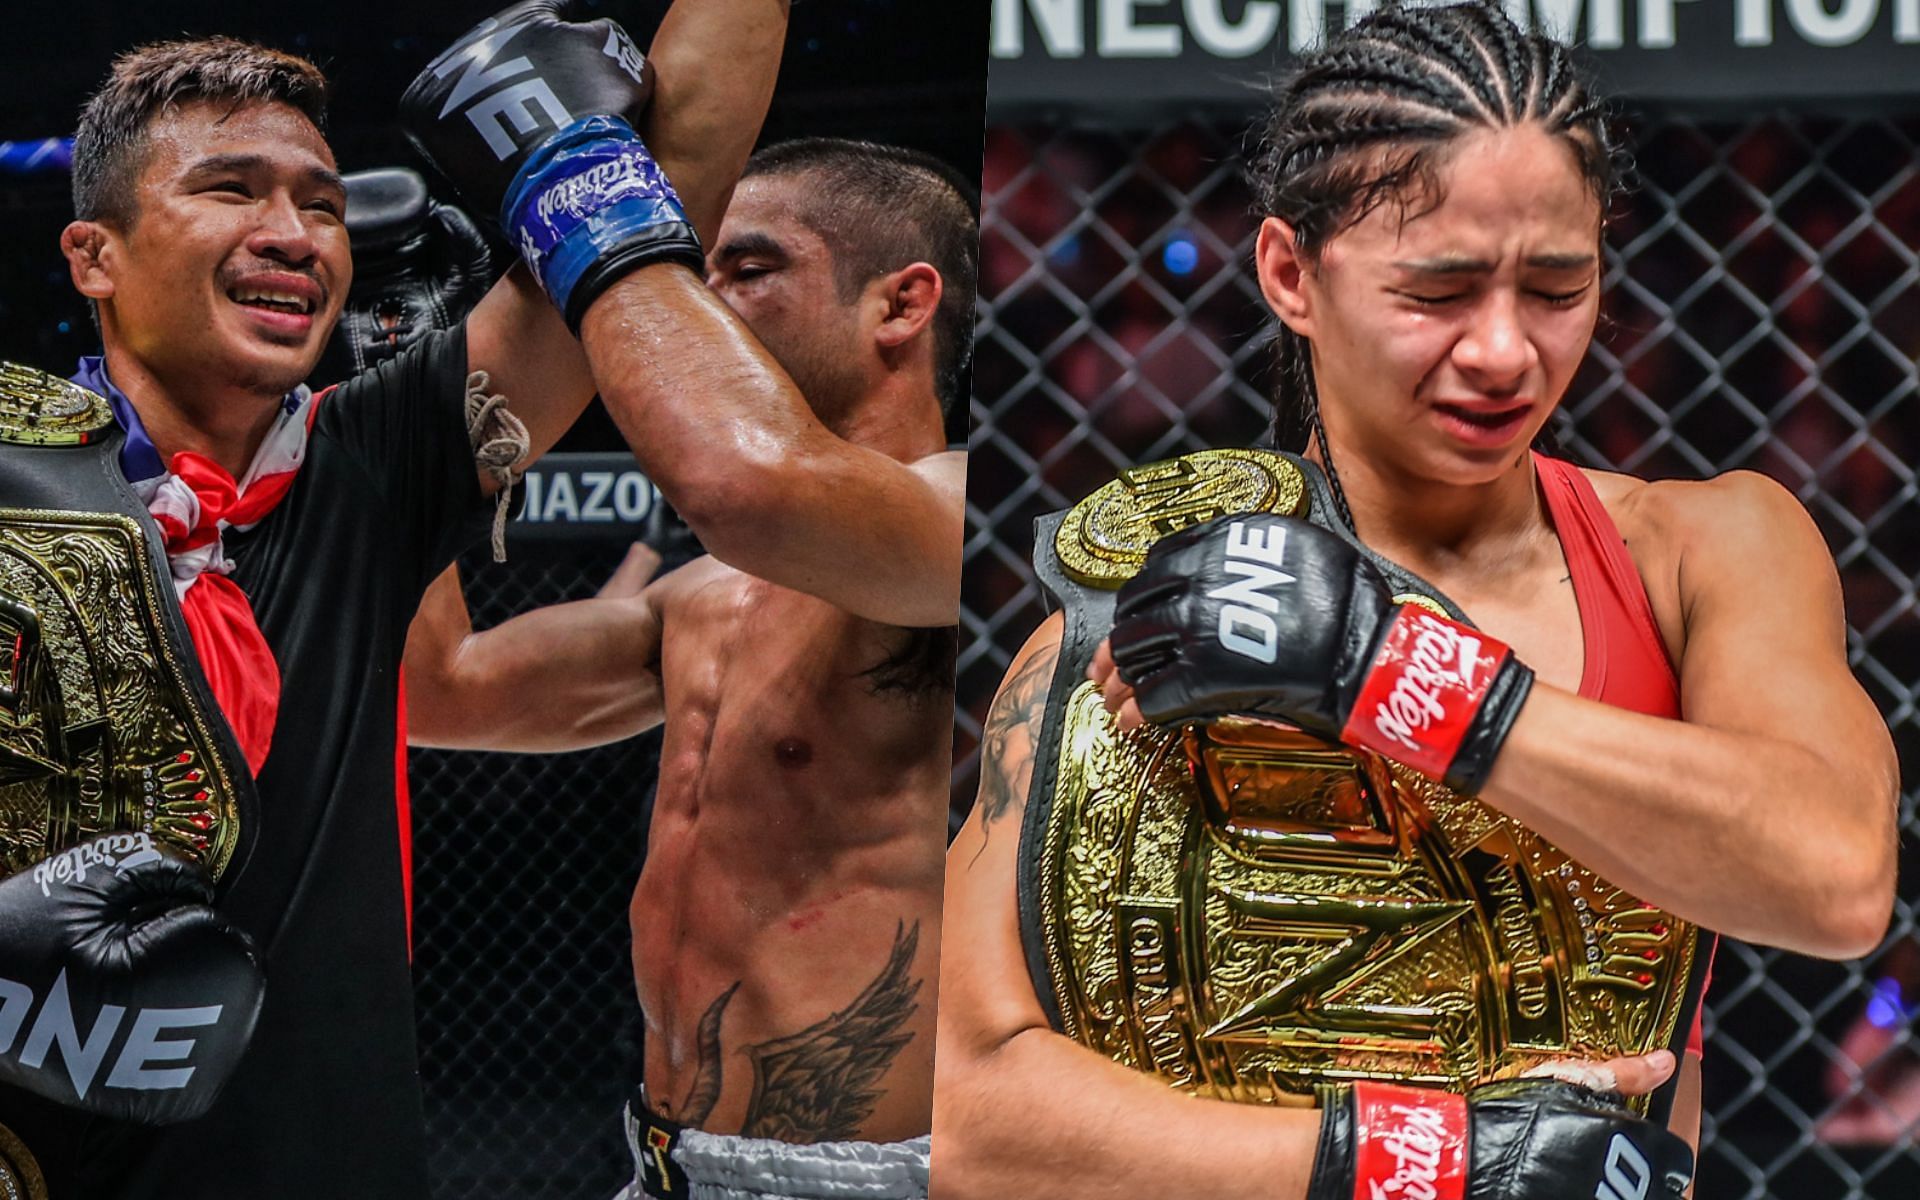 Superlek (L) and Allycia Hellen Rodrigues (R) retained their world titles at ONE Fight Night 8. | Photo by ONE Championship